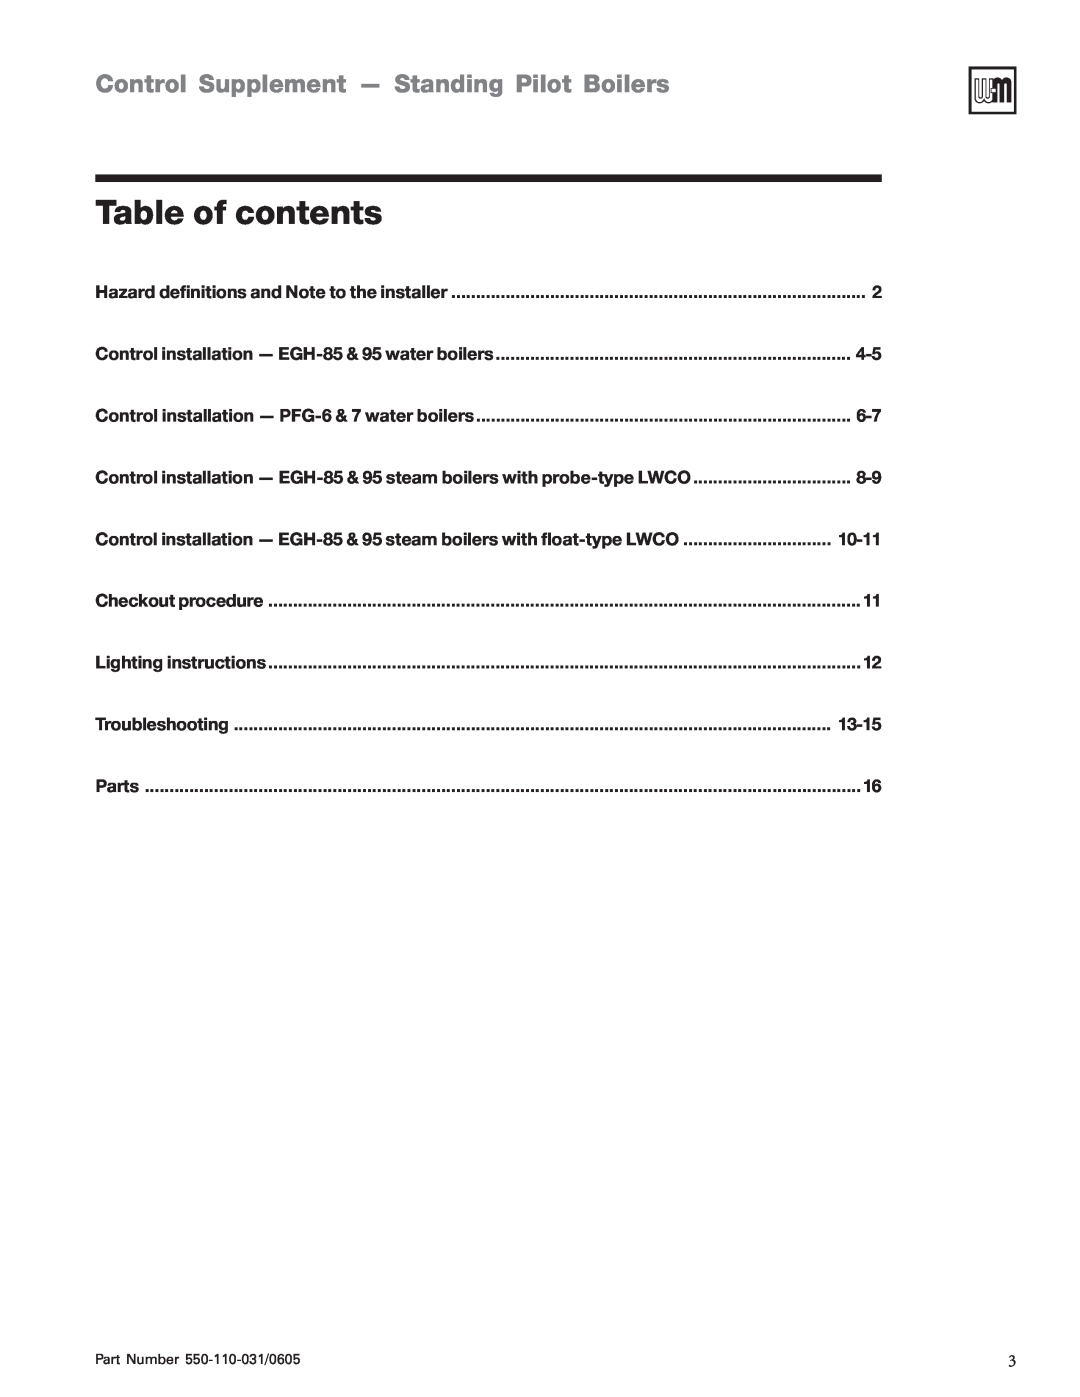 Weil-McLain PFG-6, EGH-95, EGH-85 manual Table of contents, Control Supplement - Standing Pilot Boilers, 10-11, 13-15 